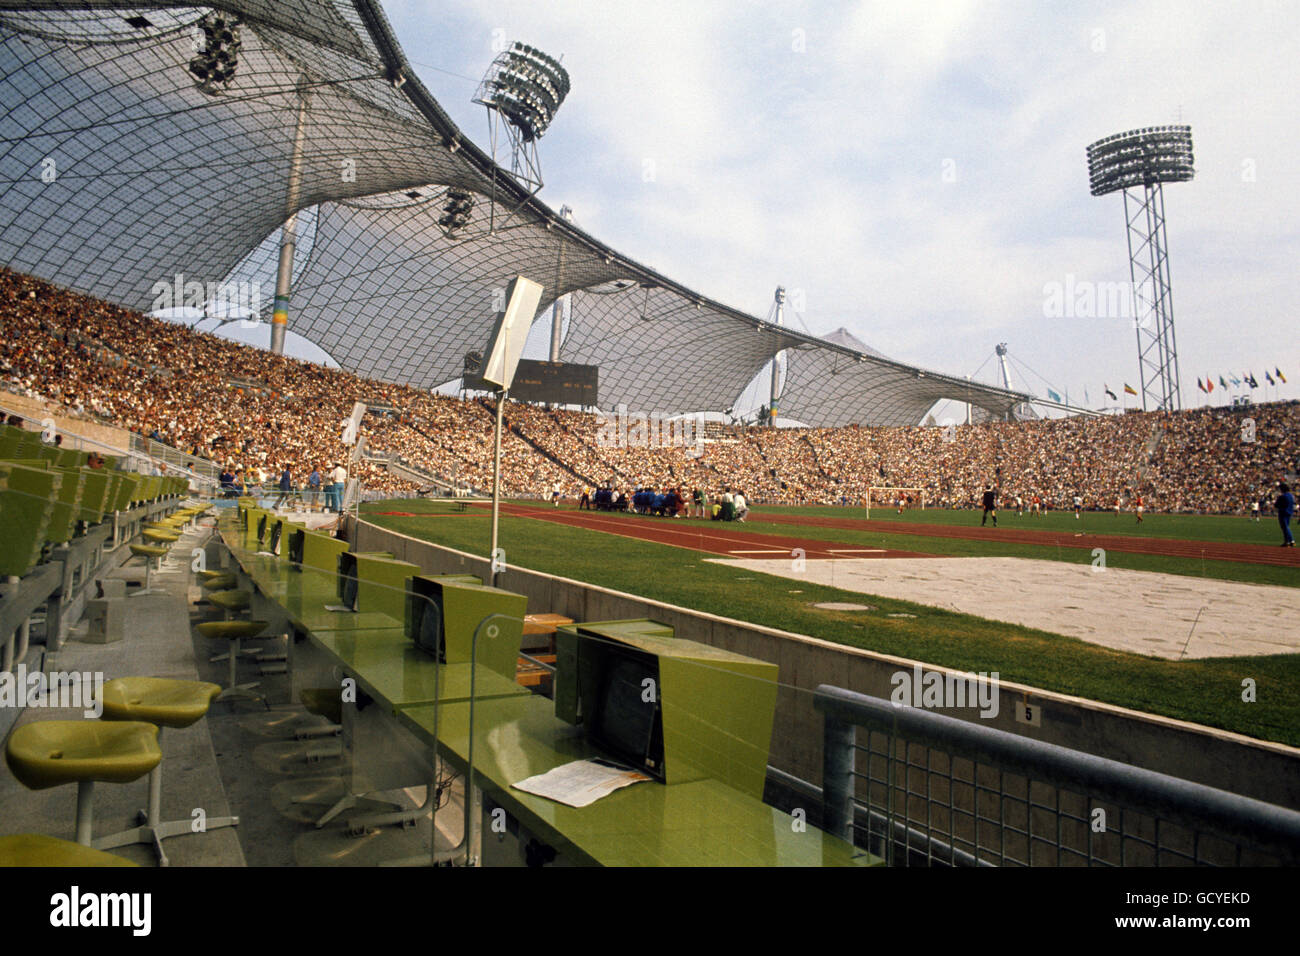 Soccer - 1972 Summer Olympics Games, Munich - Bronze medal match - Soviet Union v East Germany - Olympic Stadium, Munich. View of the press seats in the stand during the match. Stock Photo